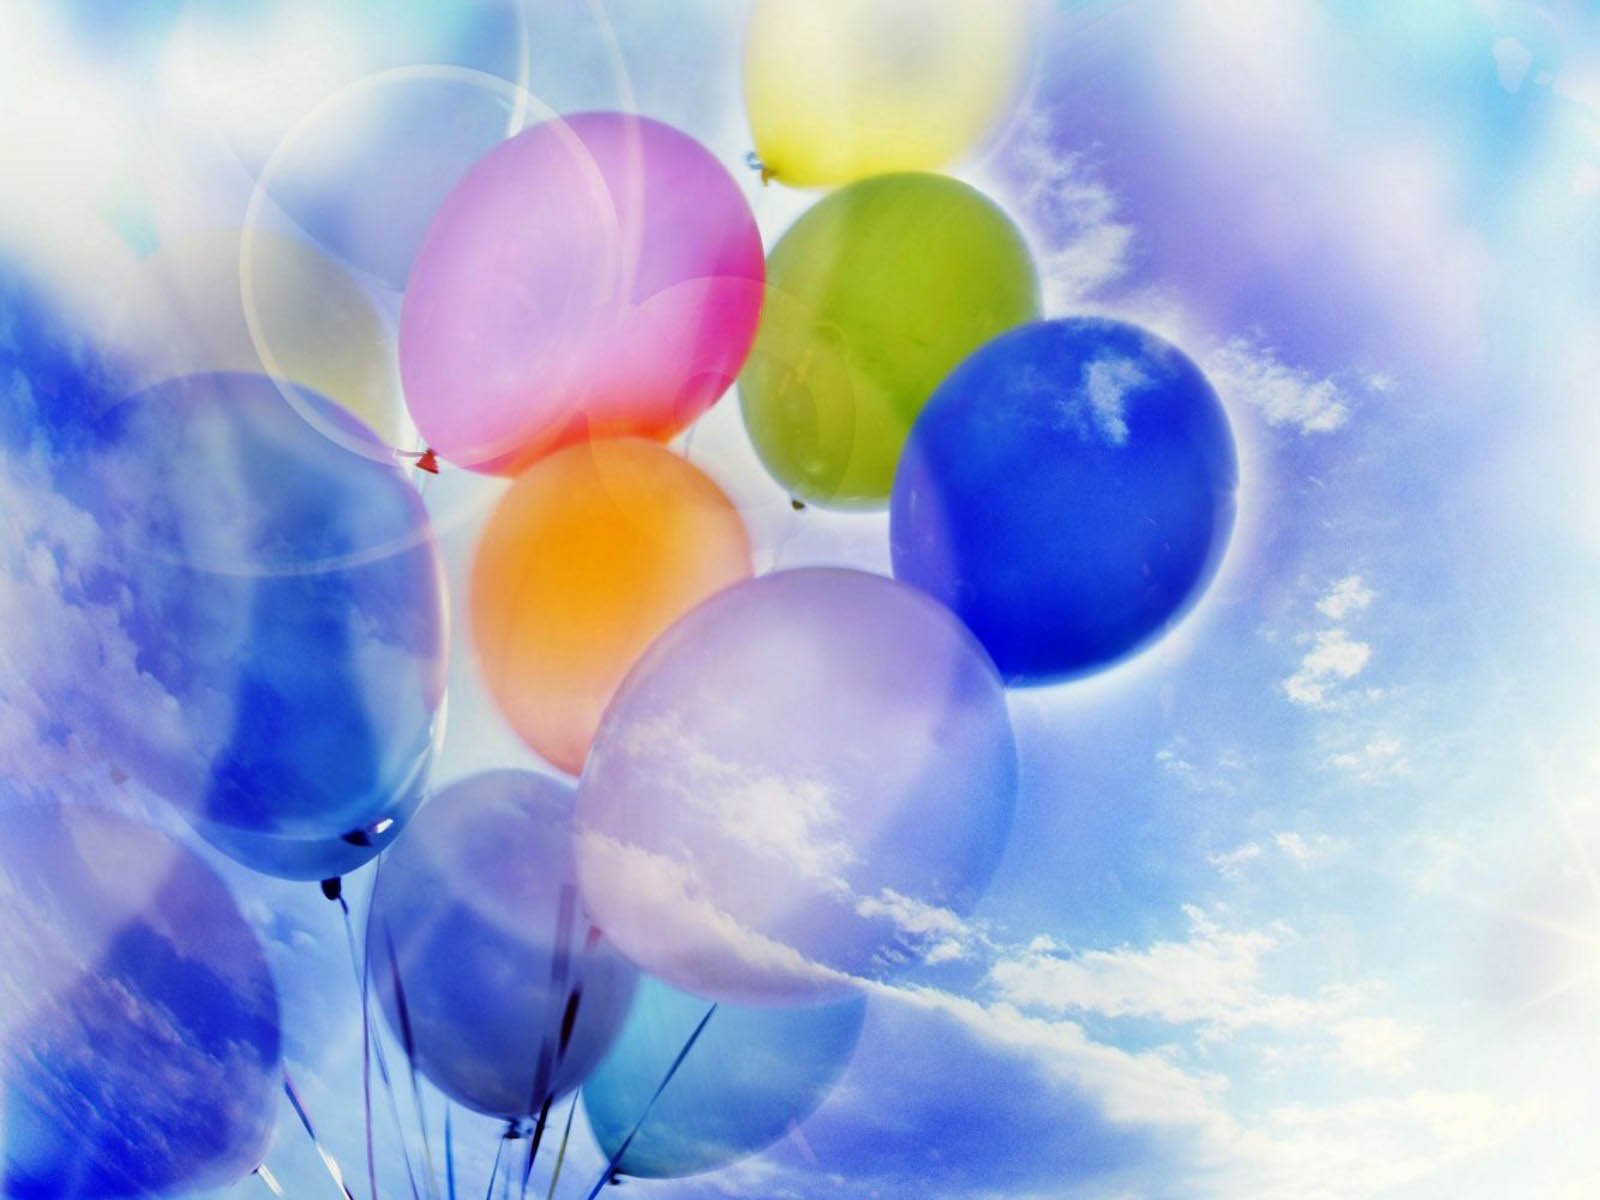 Tag Balloons Wallpapers Images Photos Pictures and Backgrounds for 1600x1200